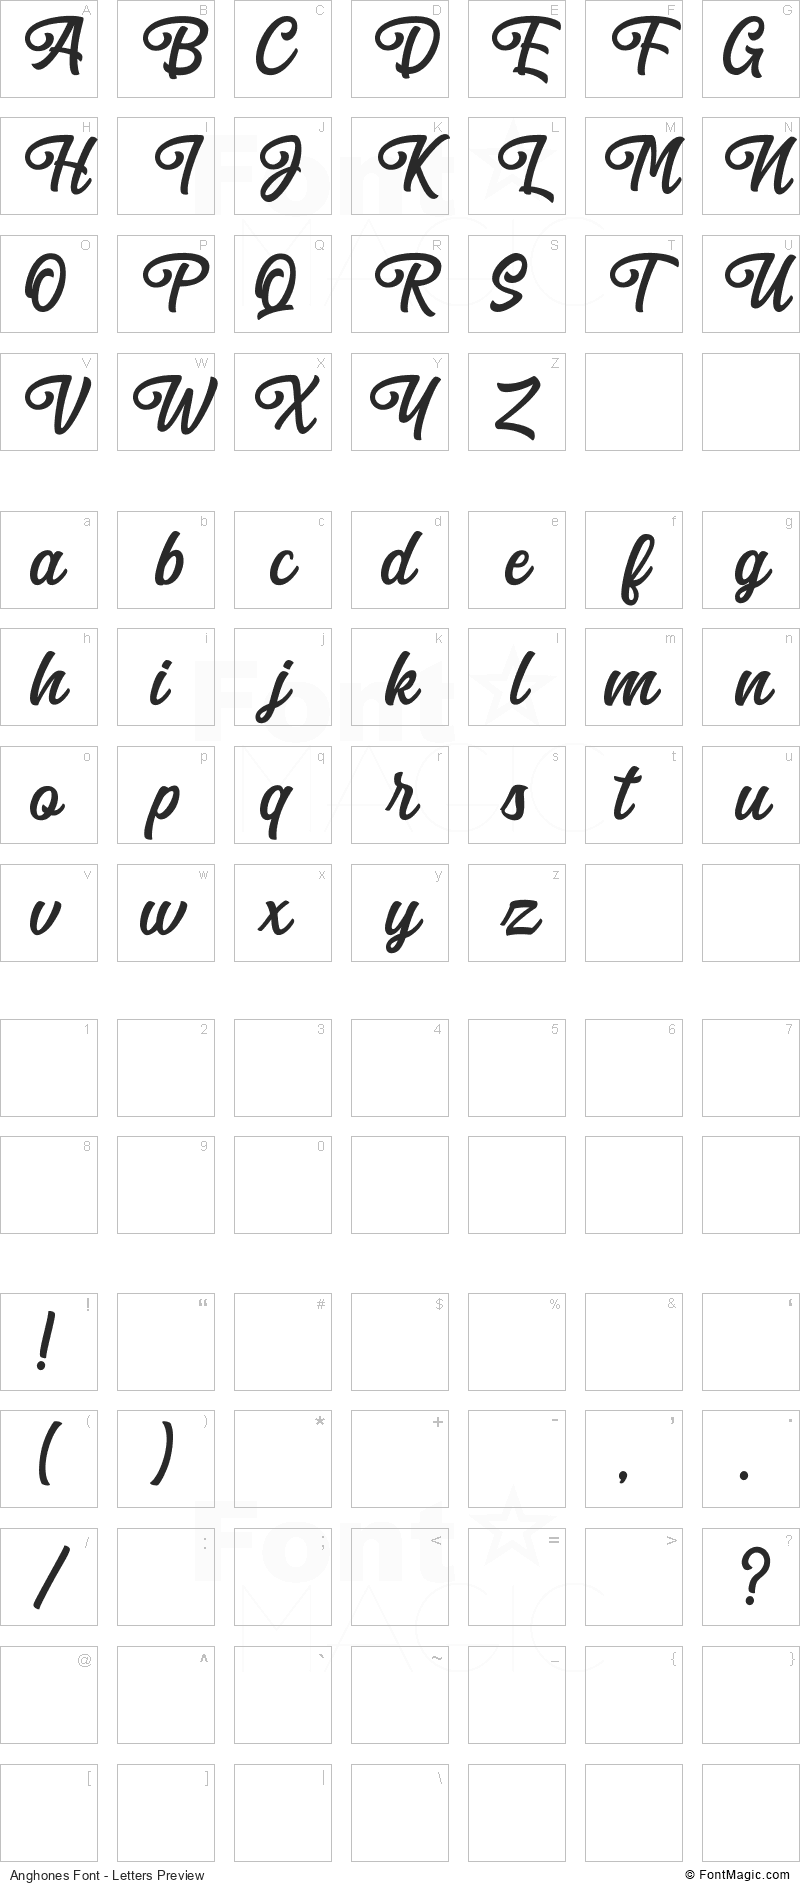 Anghones Font - All Latters Preview Chart